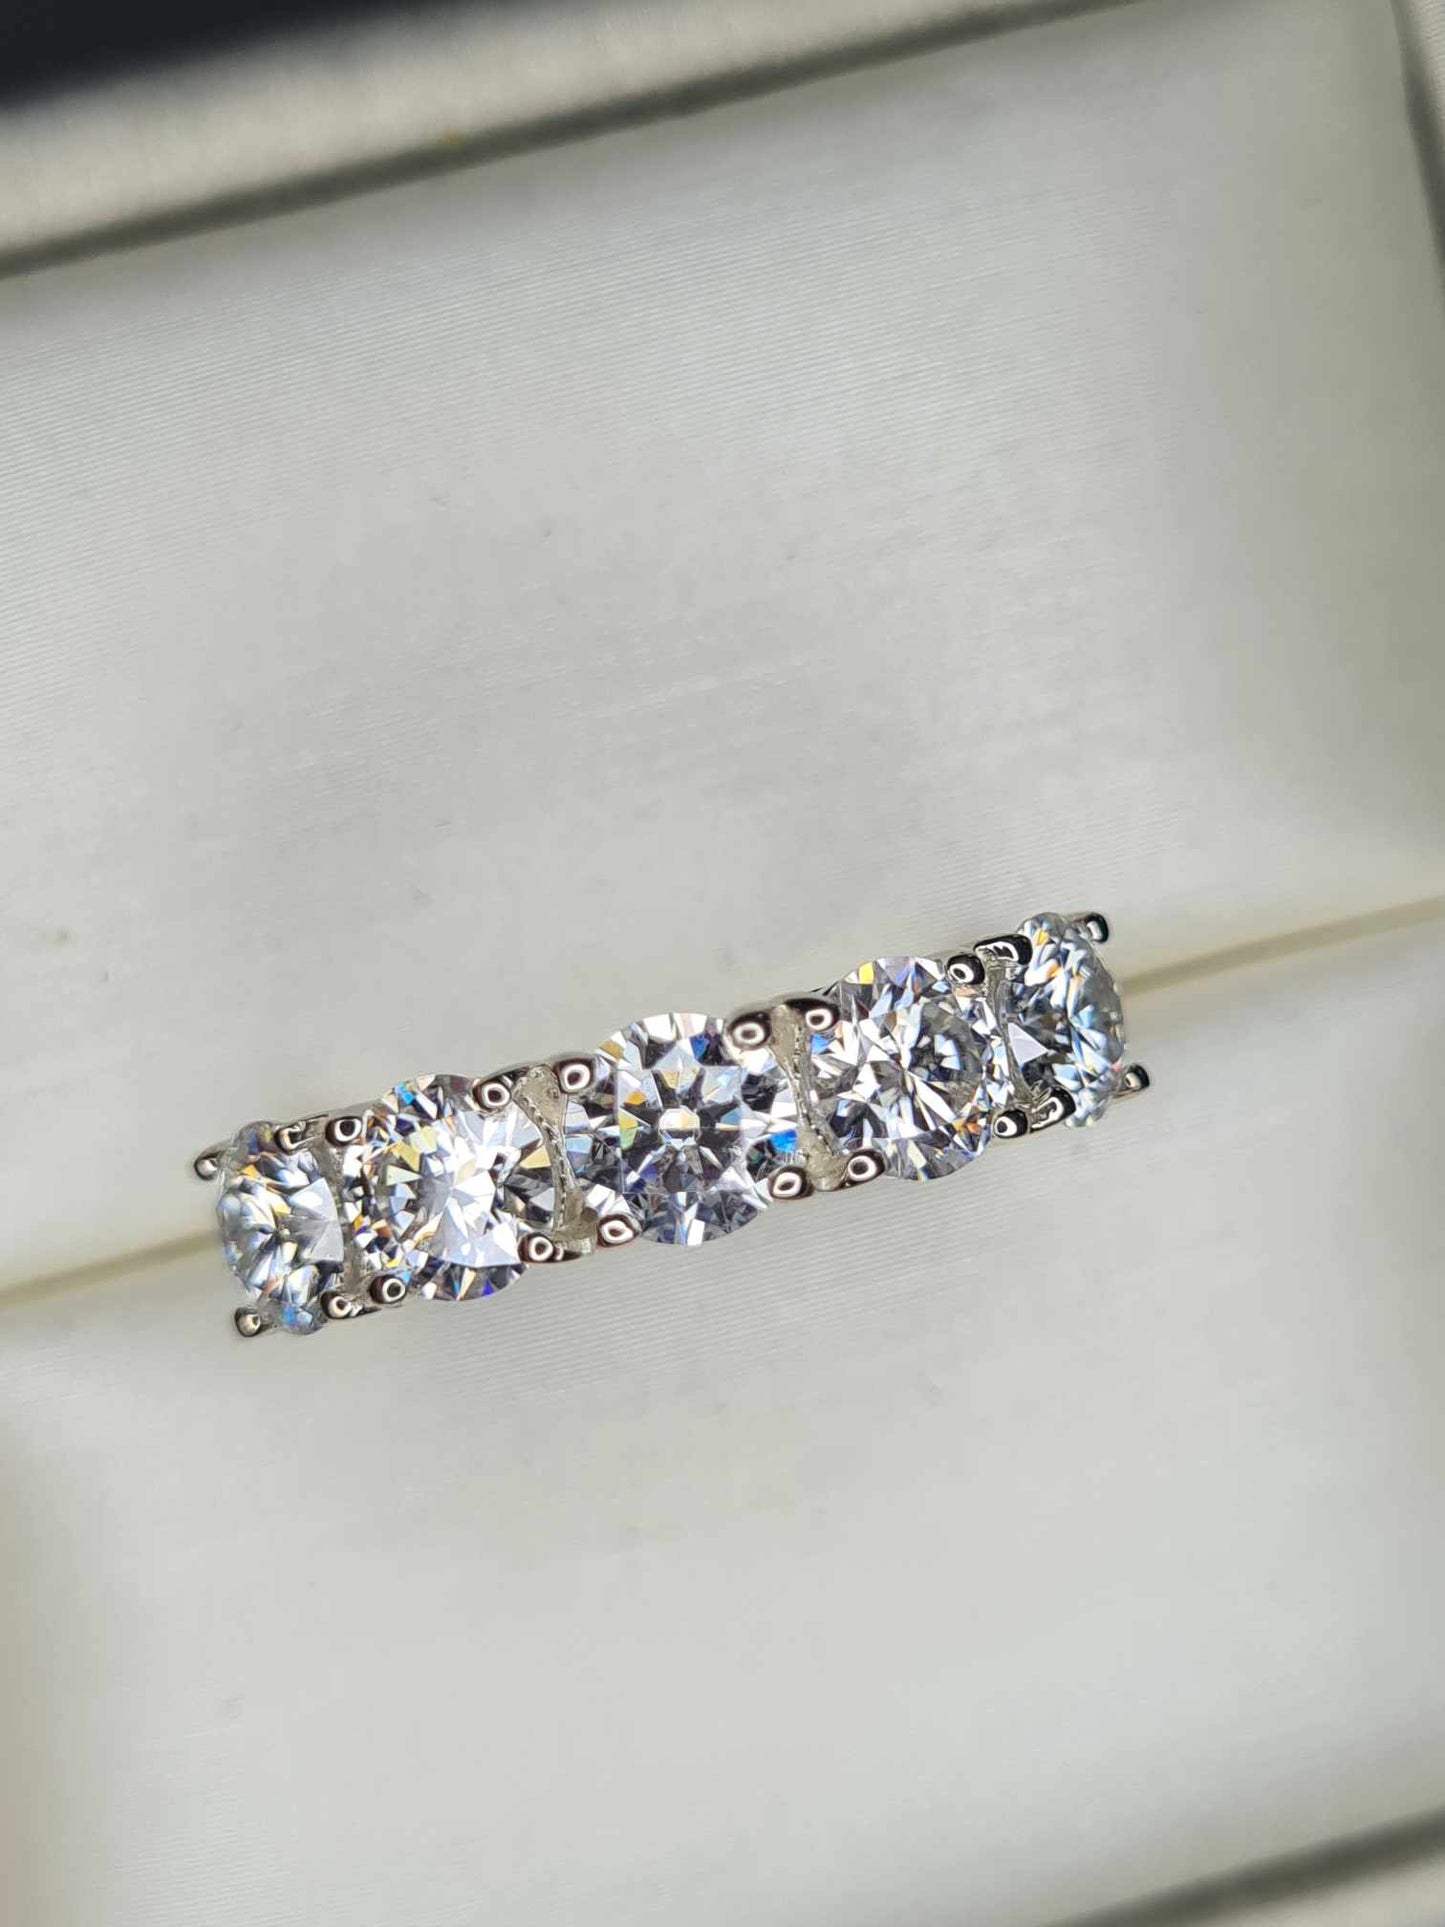 1.74 Ct Moissanite 5 Stone Ring in Platinum Overlay 925 Sterling Silver SIZES K,M